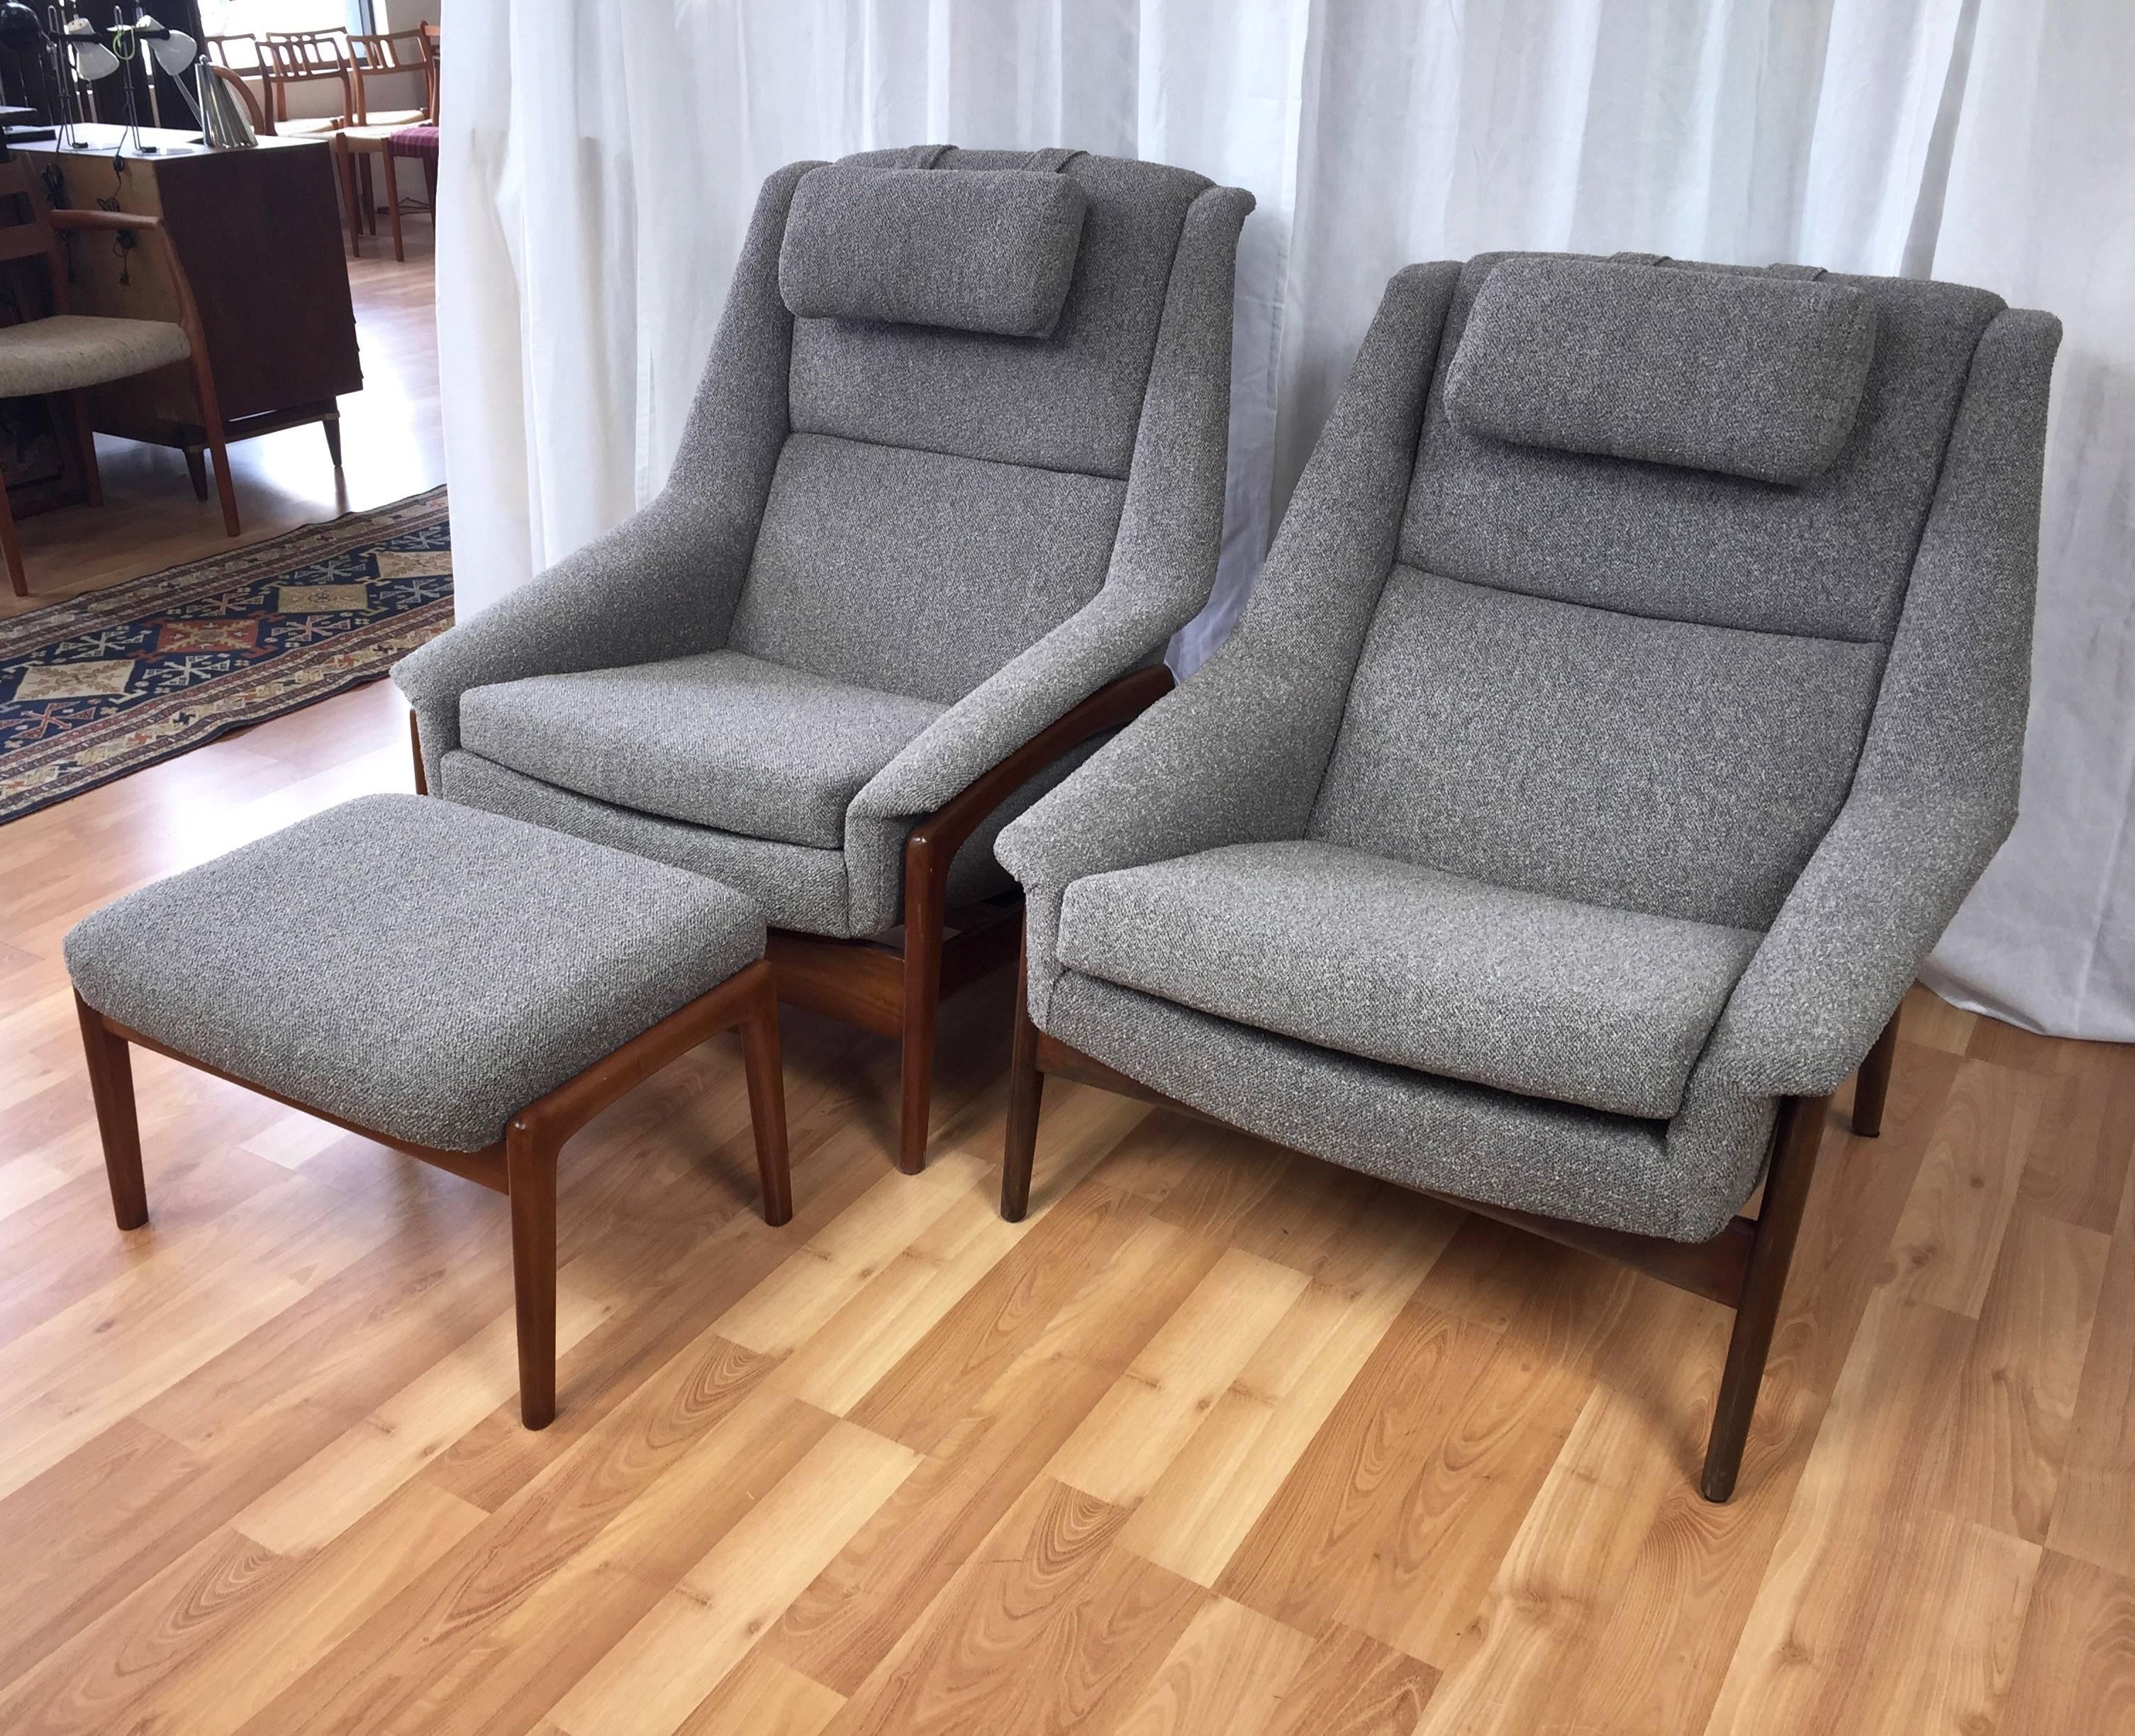 An exceptional set of complementary upholstered Folke Ohlsson pieces for DUX, comprised of one lounge chair and one rocker with matching ottoman.

All three pieces exhibit sculptural Mid-Century Modern Swedish design, and are notable for their